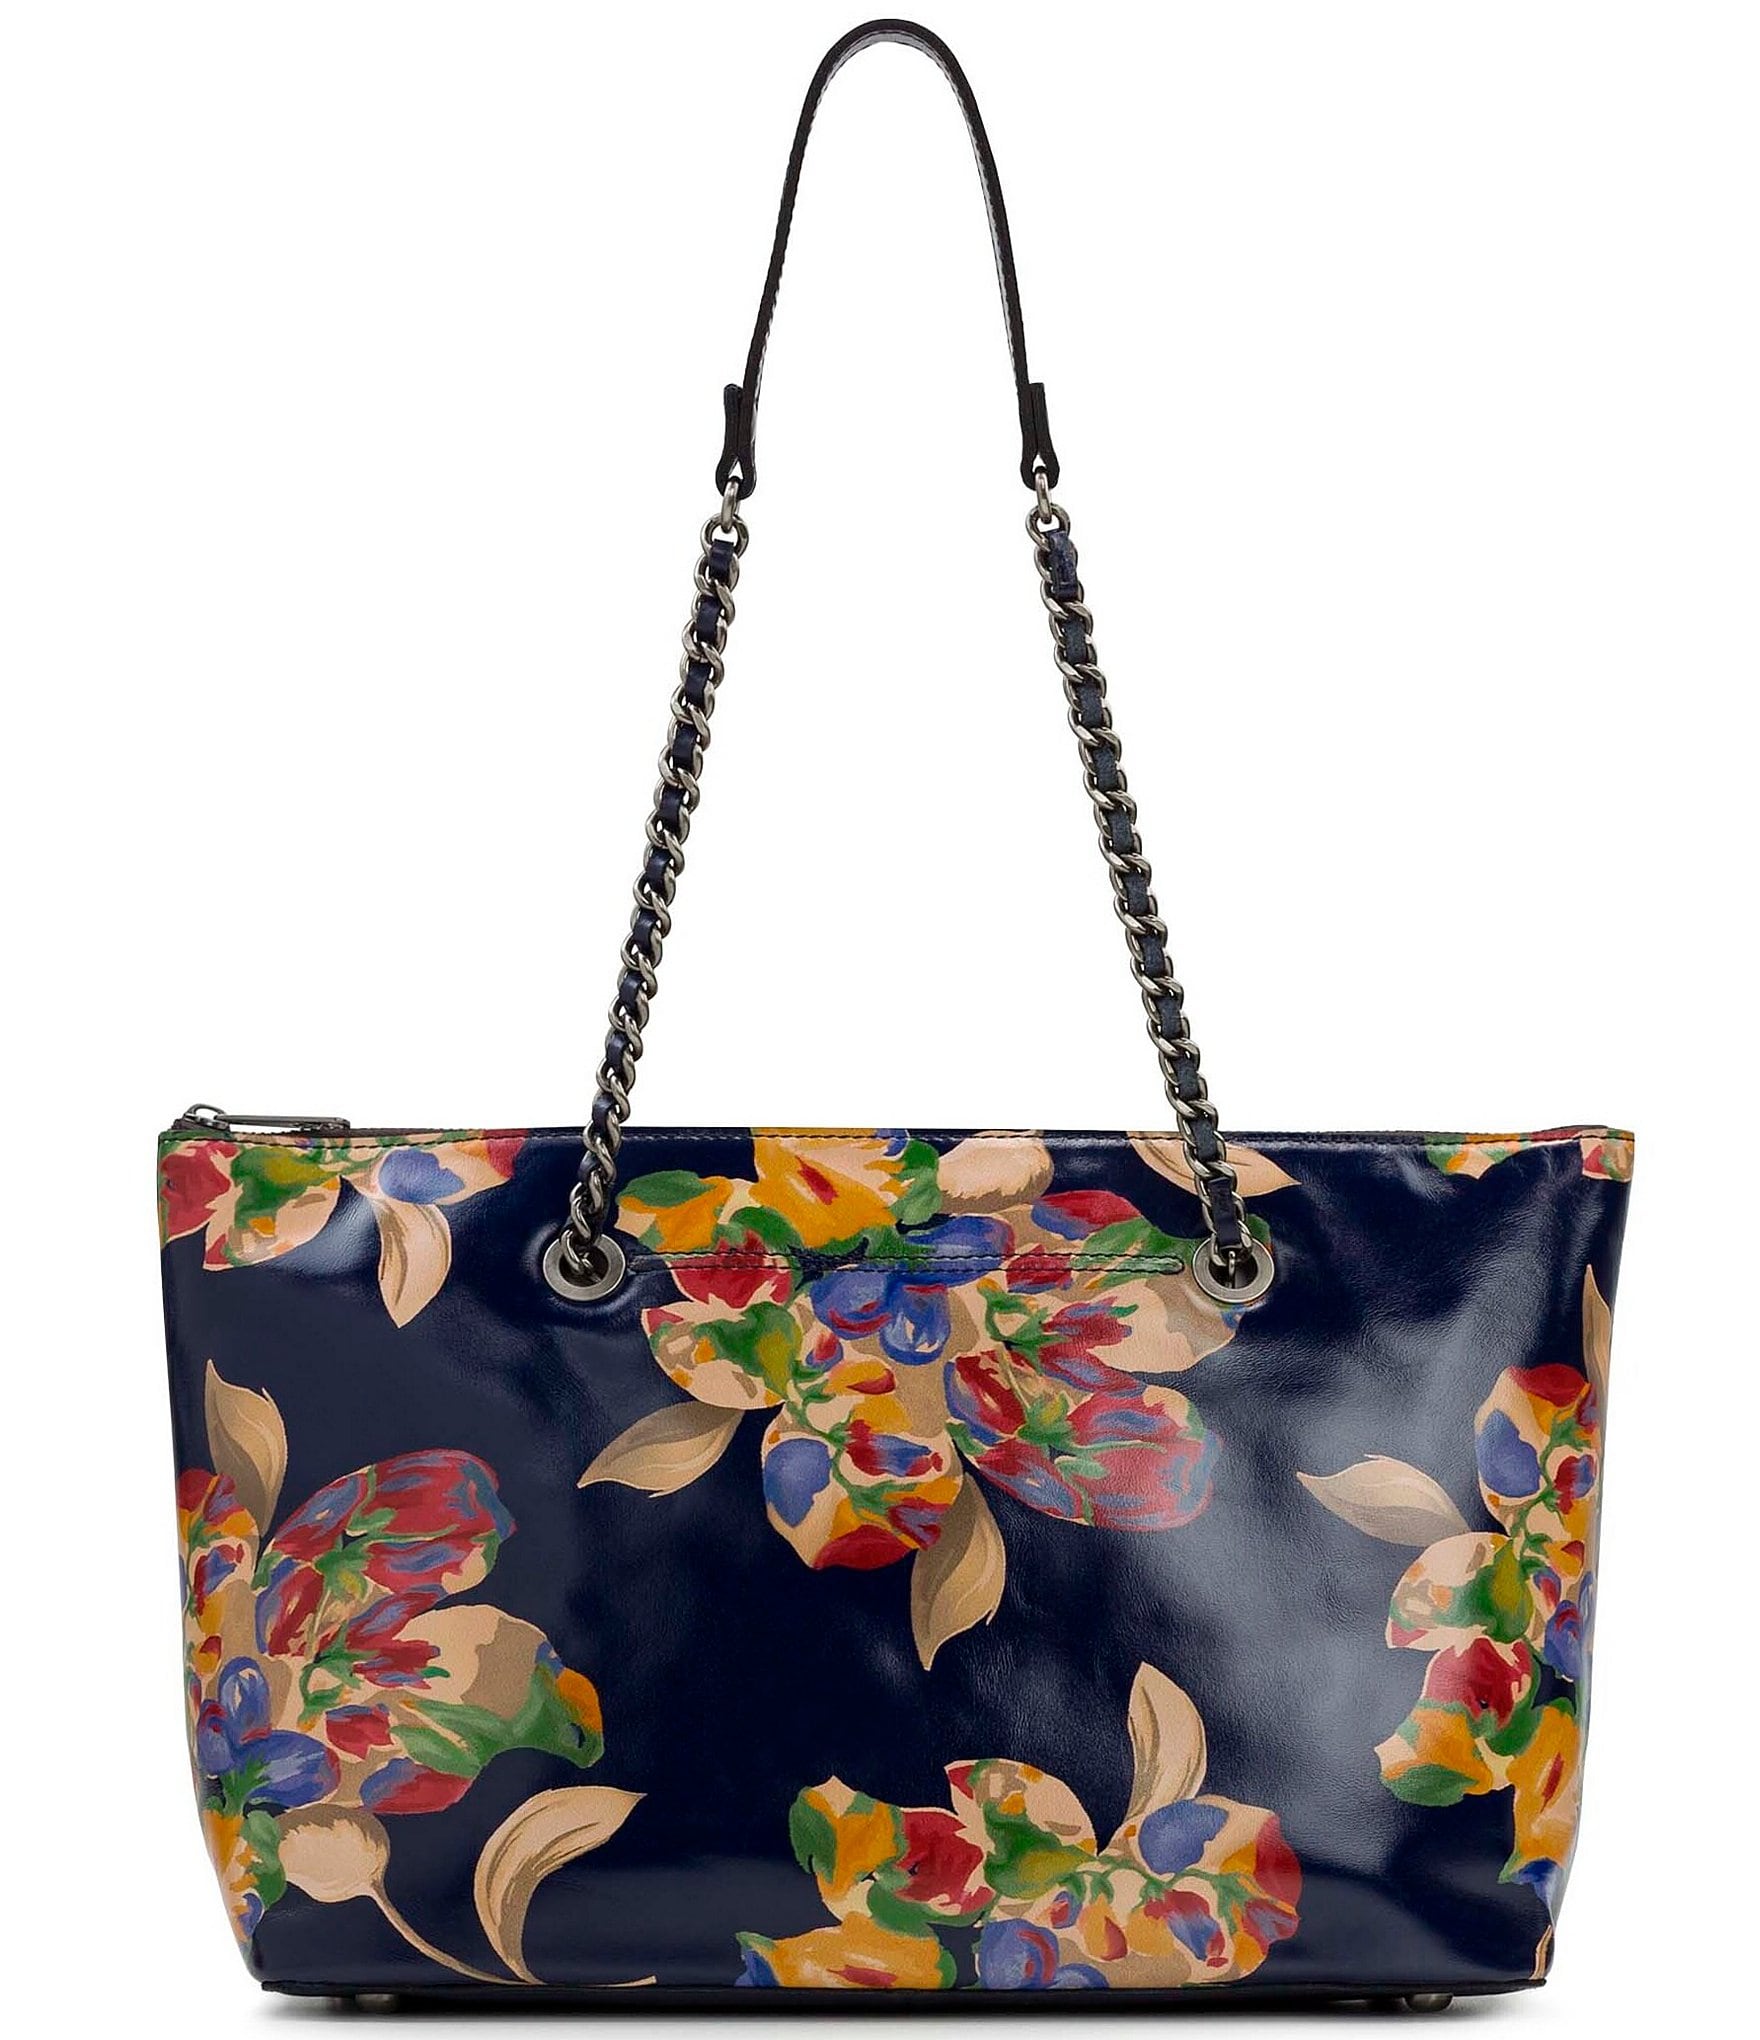 Chic Evening Bag -Glossy, Flower, Handle, PU Leather, Go now